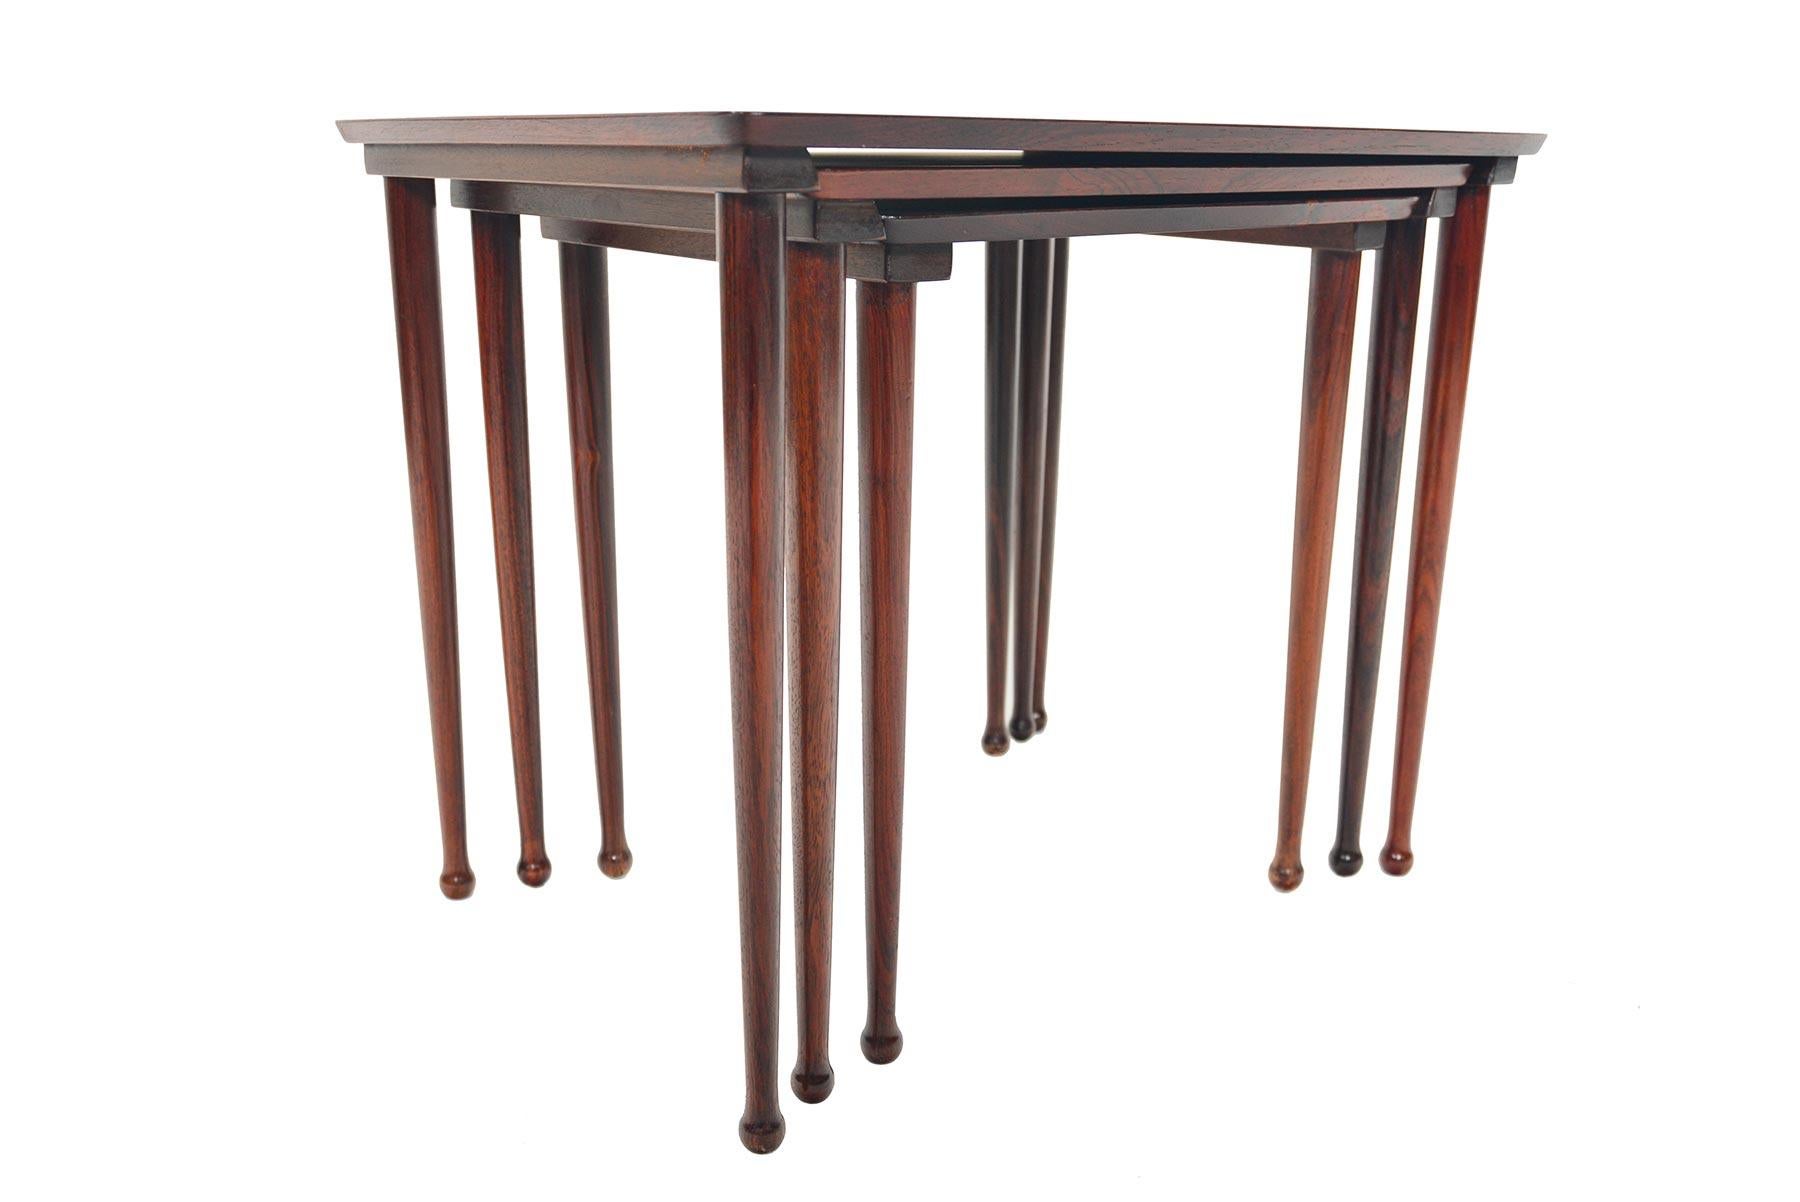 This beautiful set of Danish modern midcentury nesting tables by Mobelintarsia in rosewood will make a fantastic addition to any home. Beautifully tapered legs keep this set simple and elegant, complimented by a softly bowed rectangular table tops.